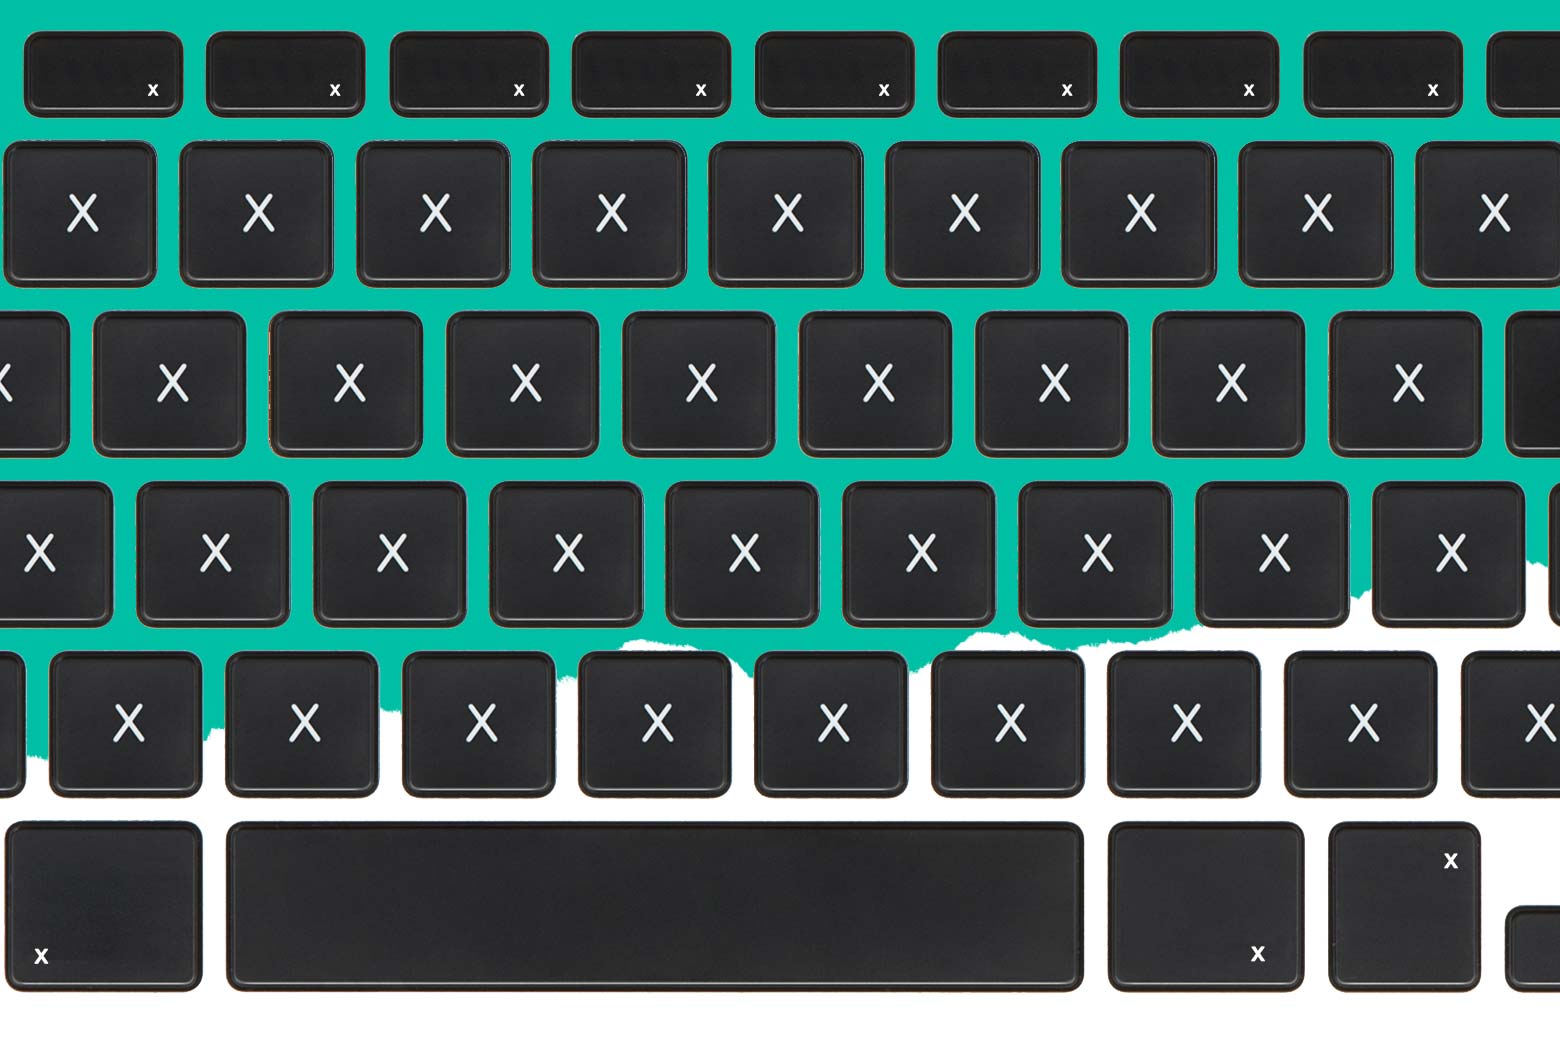 A keyboard with X’s instead of the letters.